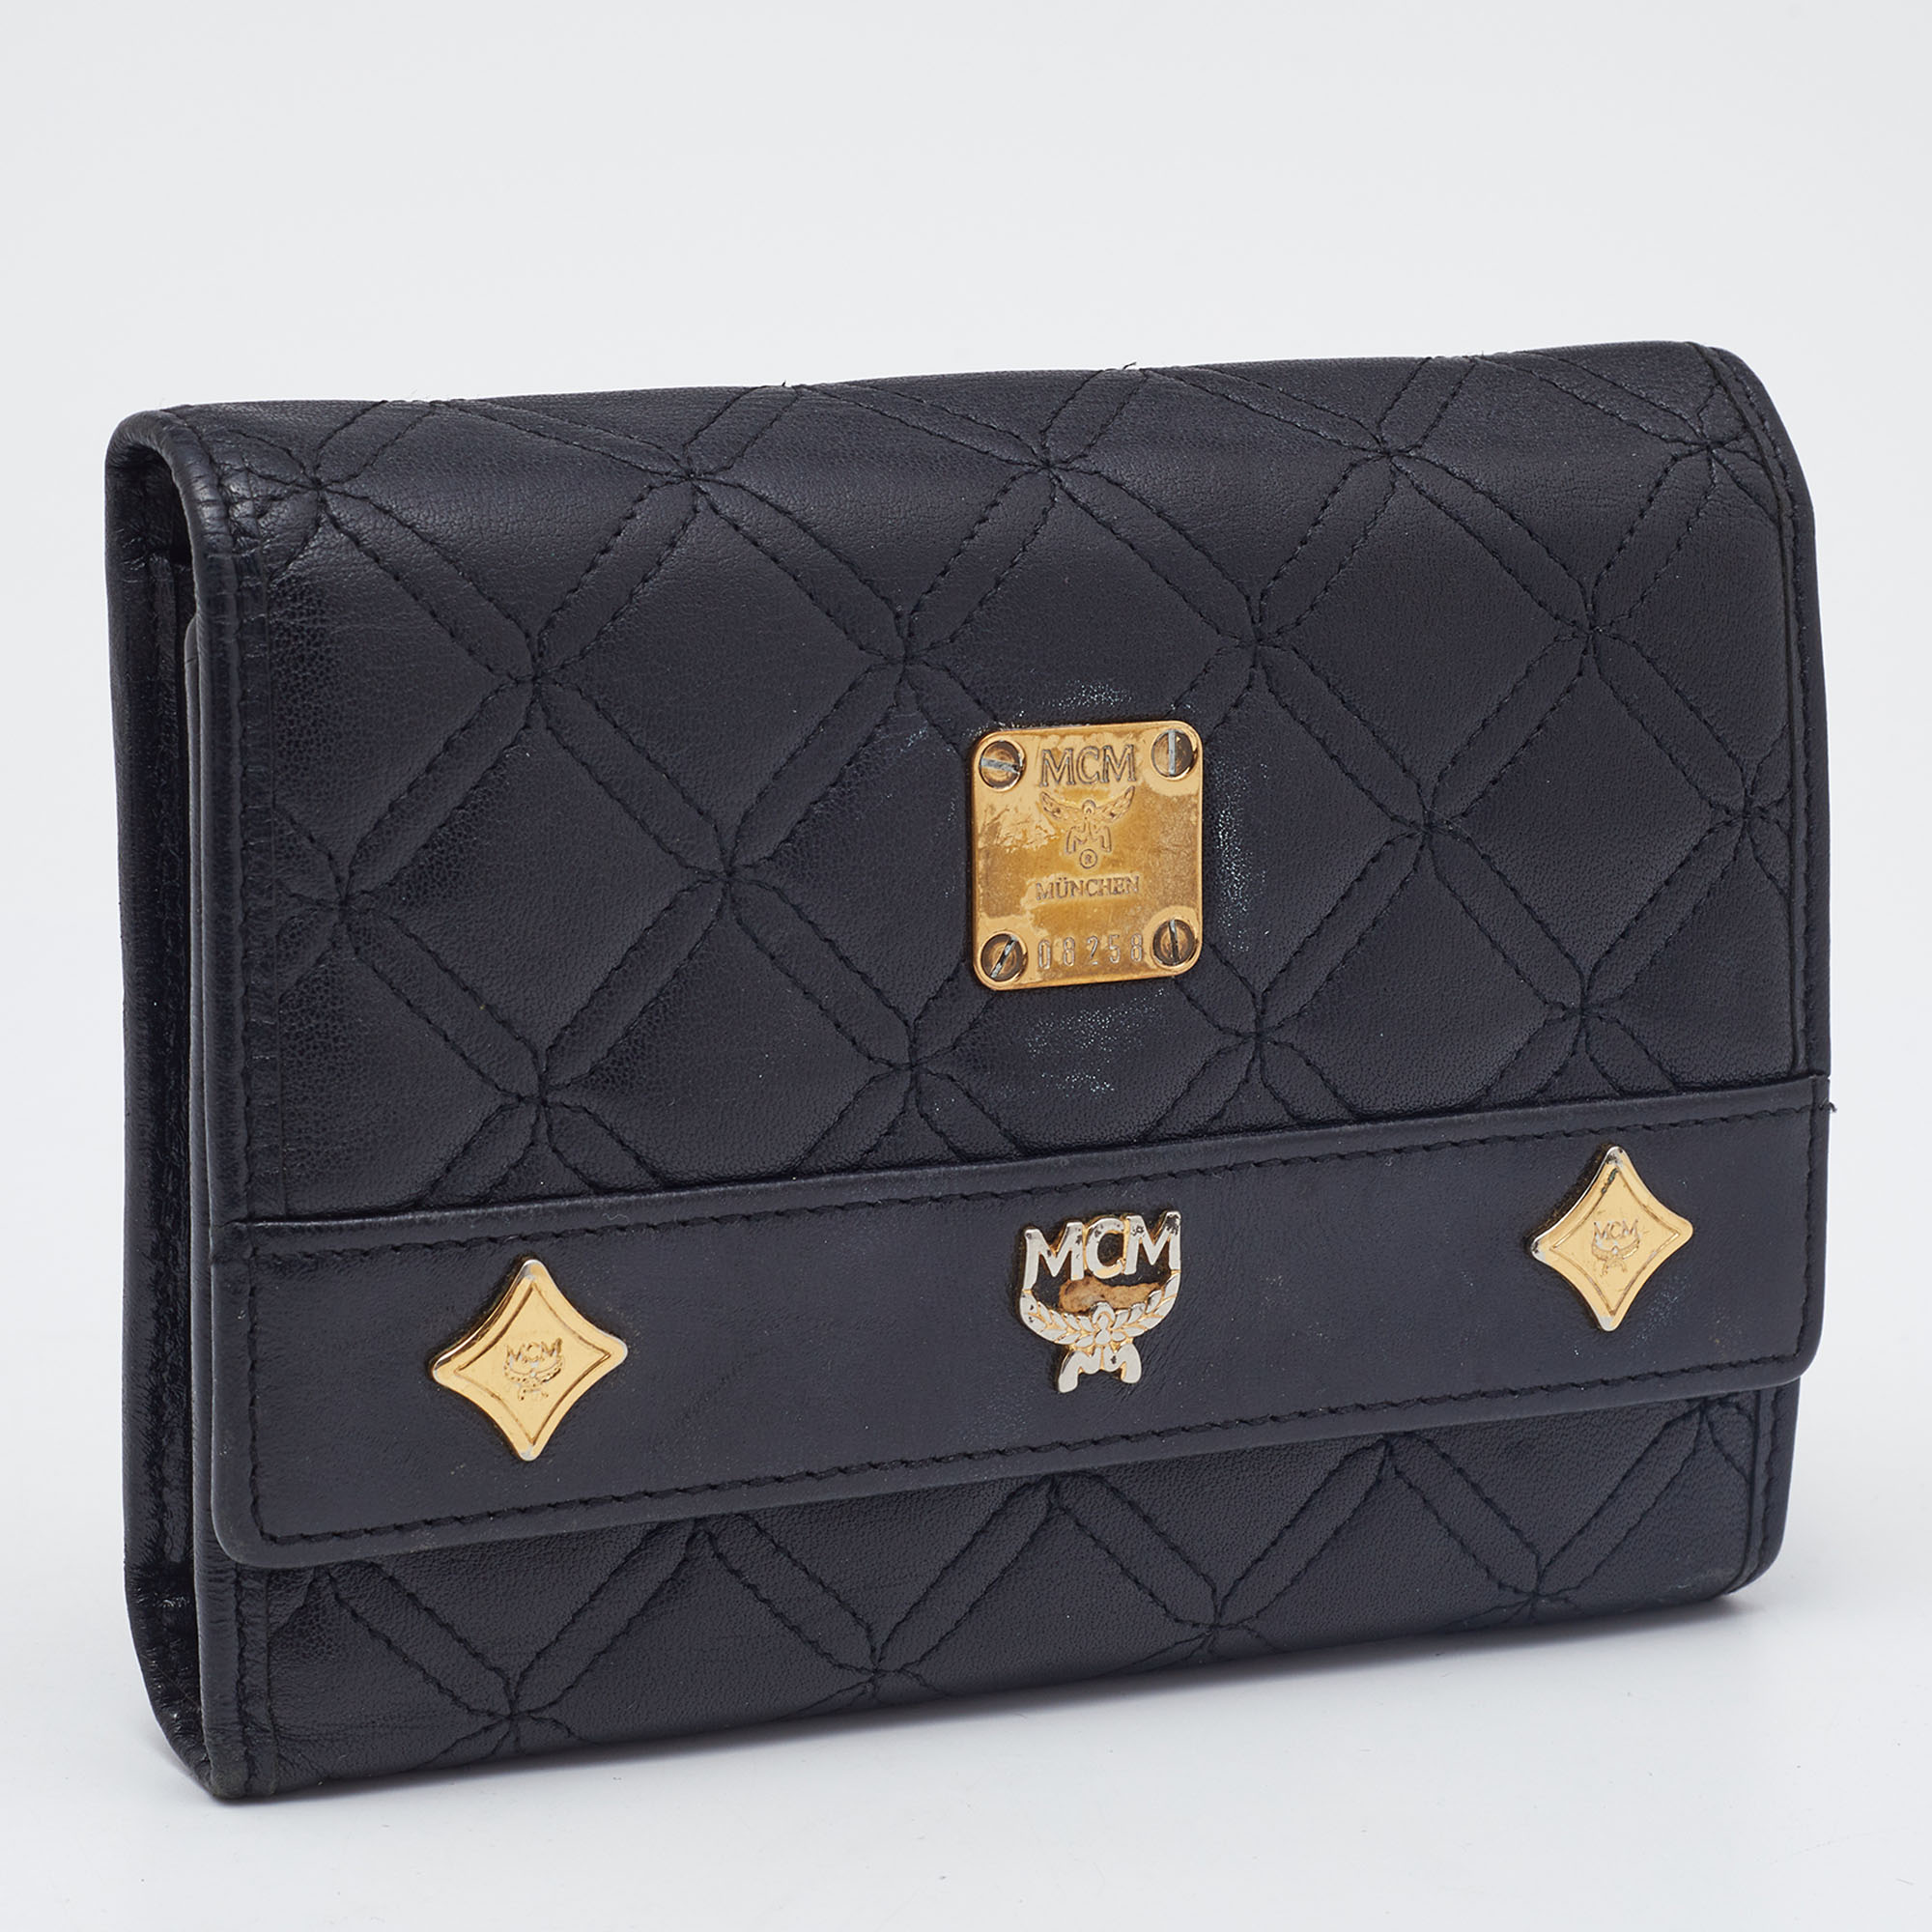 MCM Black Quilted Leather Embellished Flap Compact Wallet